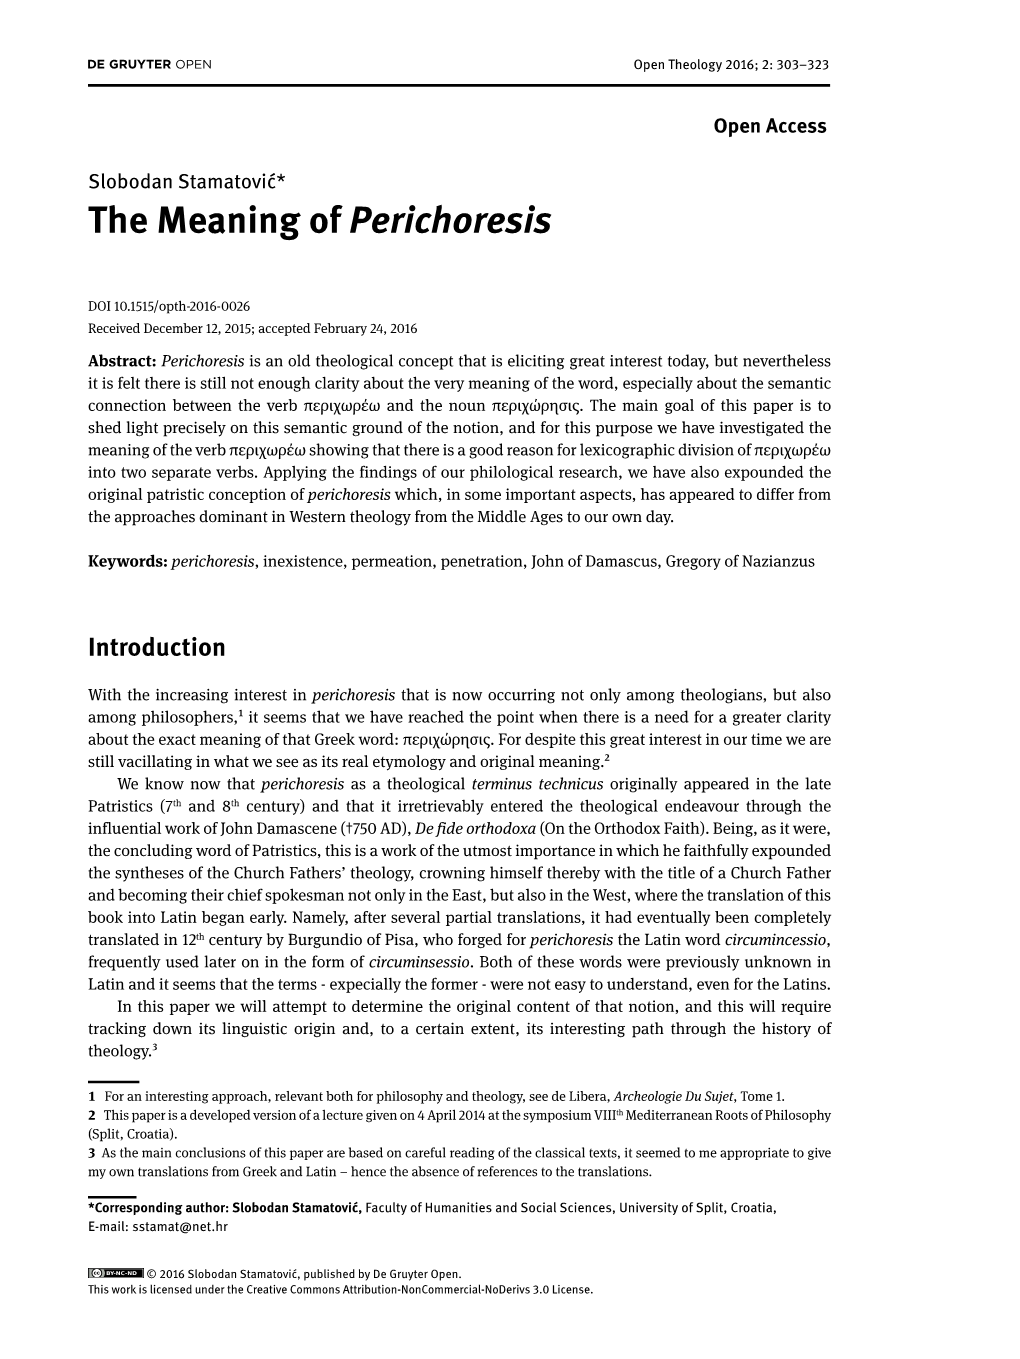 The Meaning of Perichoresis